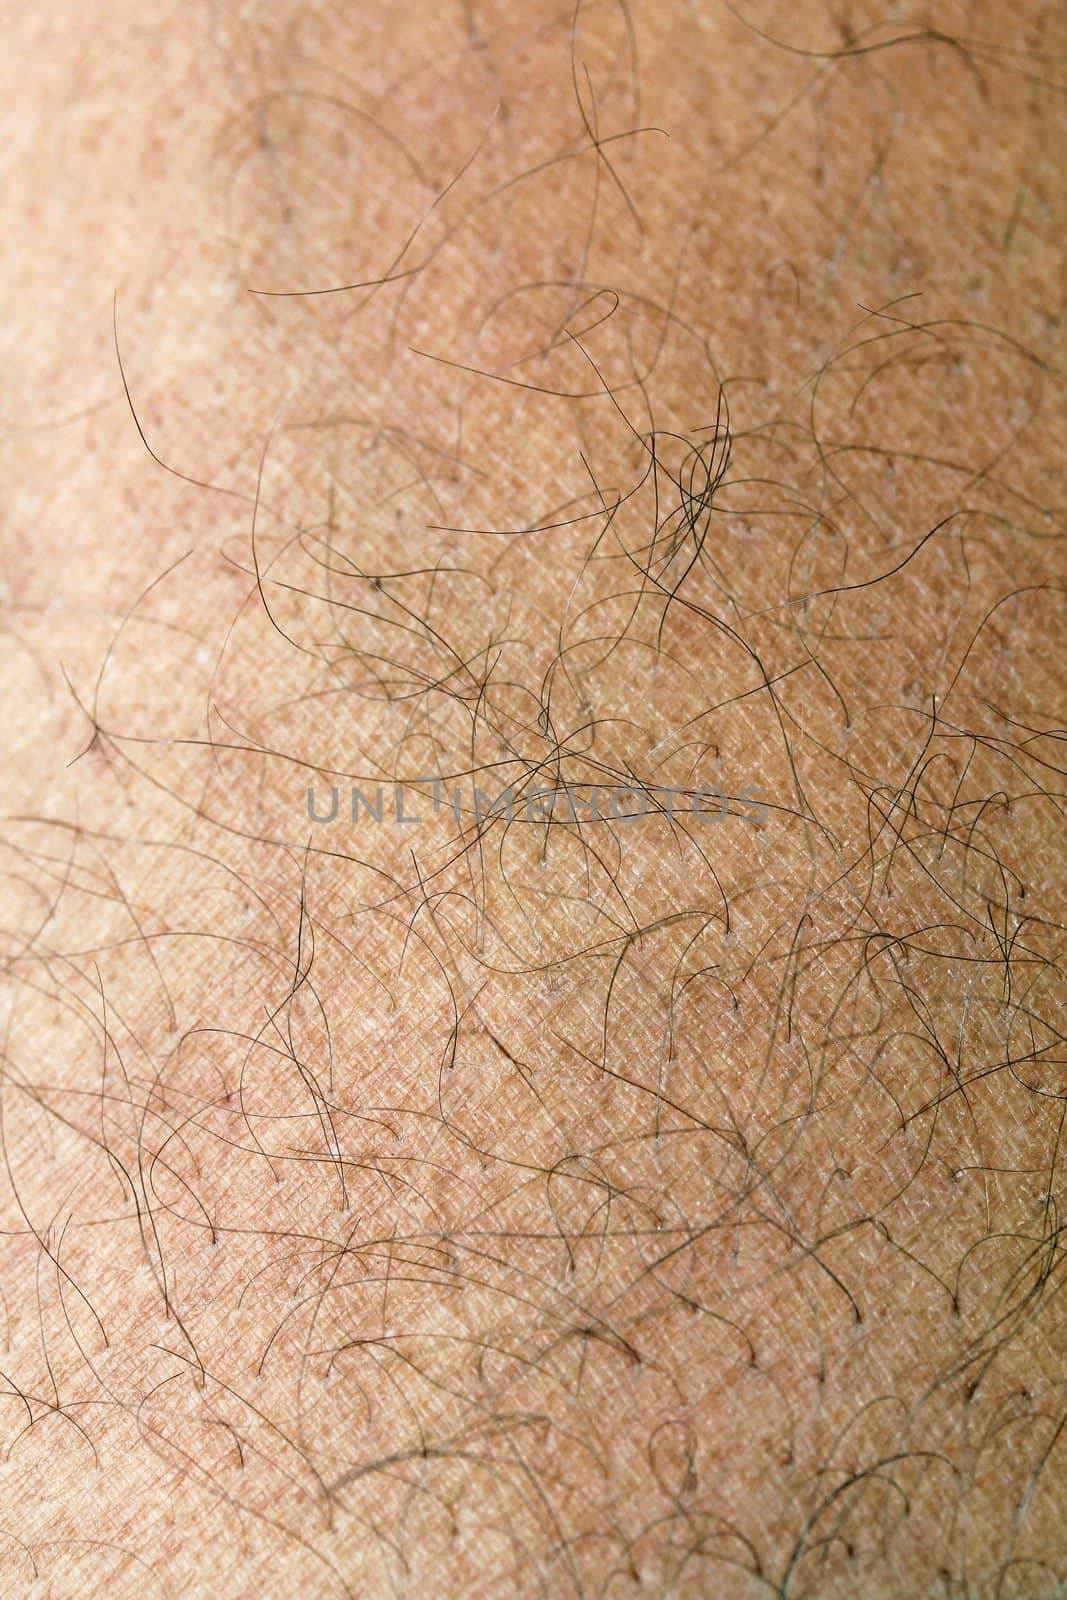 Human skin with strands of hair close up showing ridges and patterns of skin on leg 